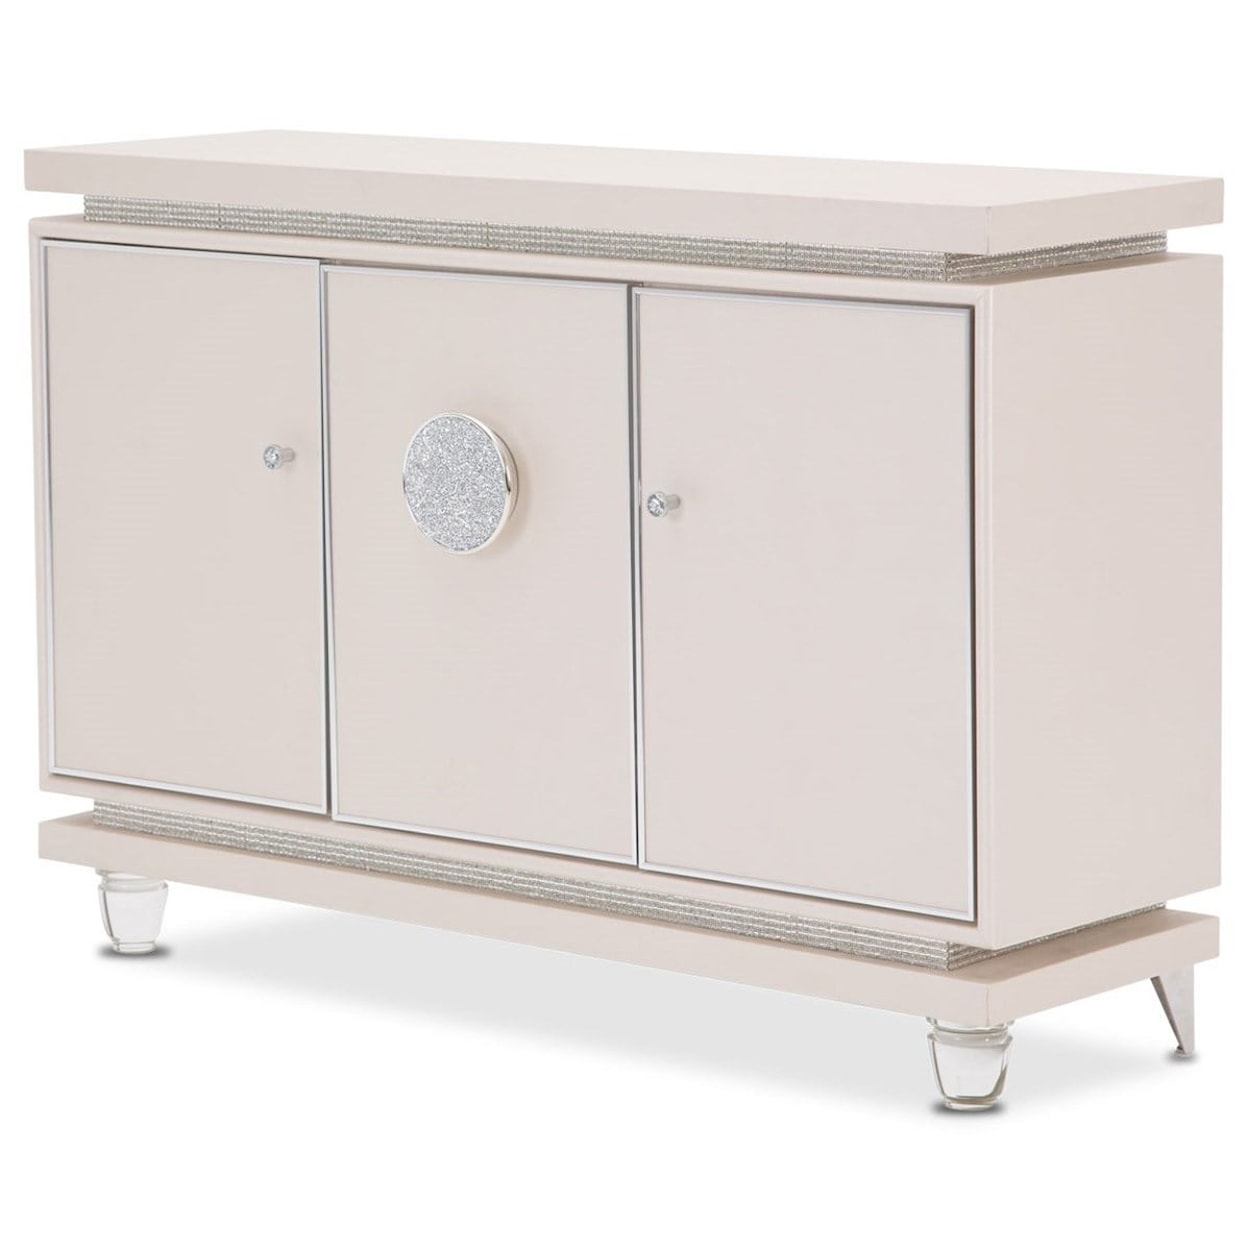 Michael Amini Glimmering Heights Upholstered Sideboard